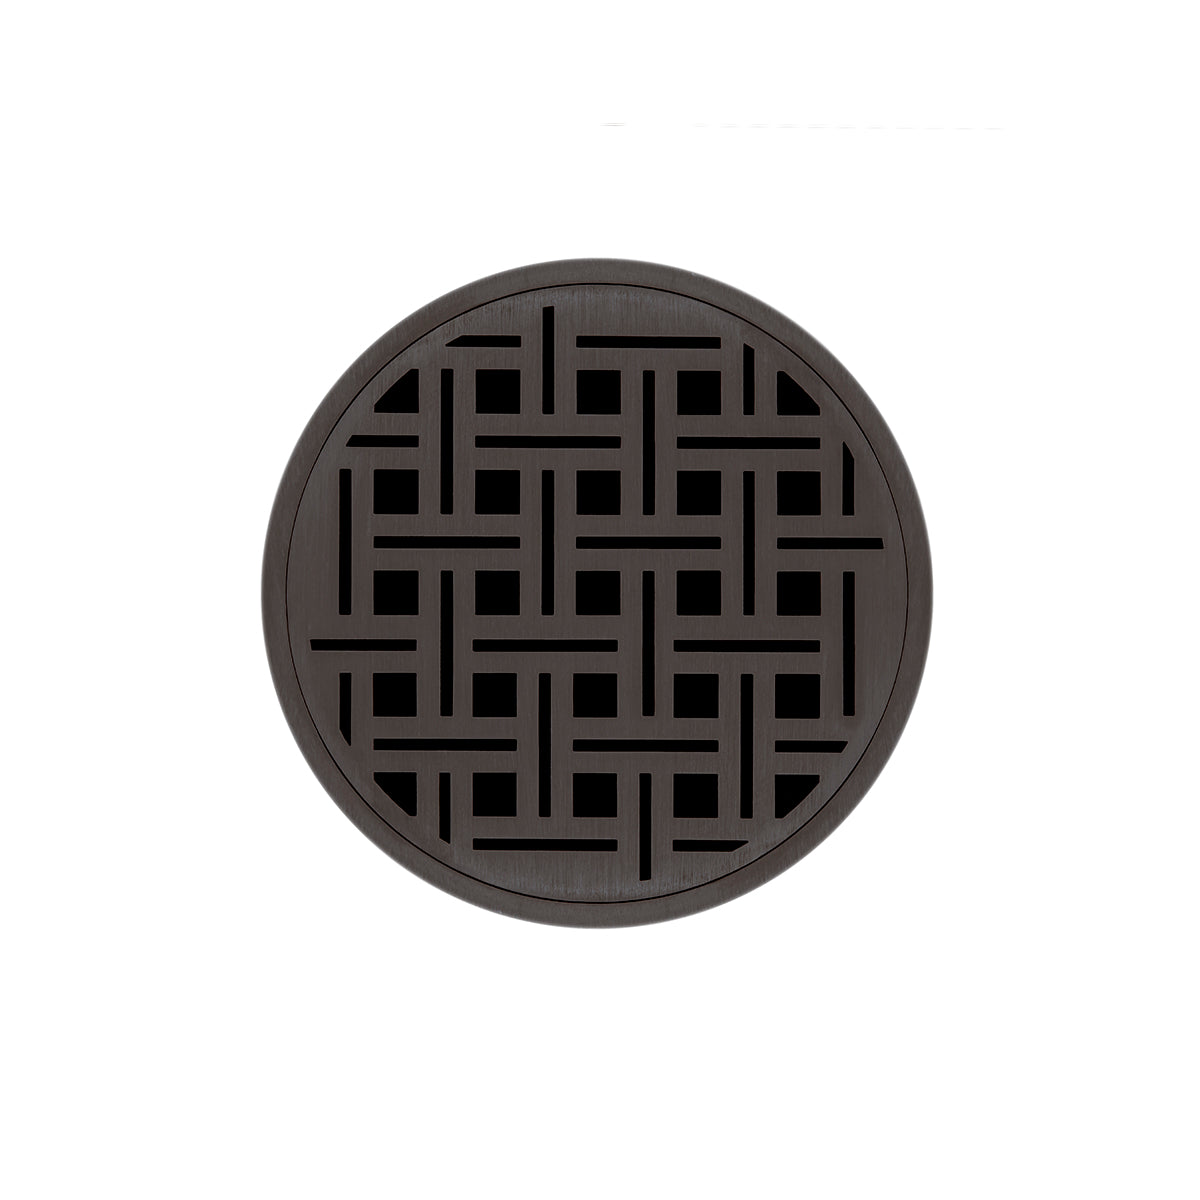 Infinity Drain 5" Round RVD 5 Premium Center Drain Kit with Weave Pattern Decorative Plate with PVC Drain Body, 2" Outlet